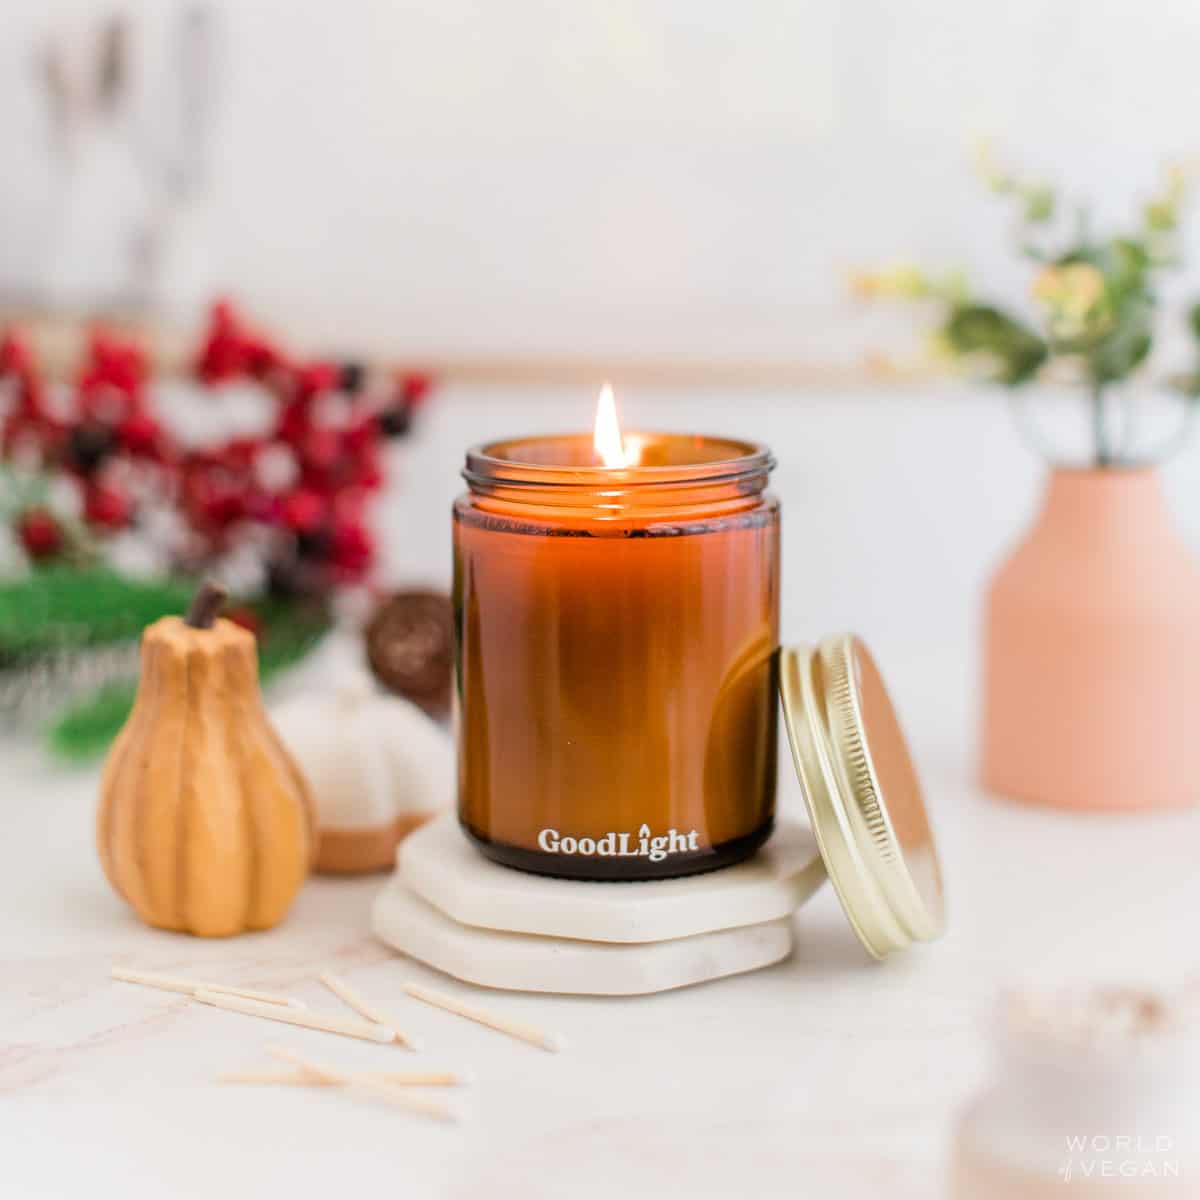 Vegan Candles: Best Cruelty-Free Soy Wax Candles for Every Occasion